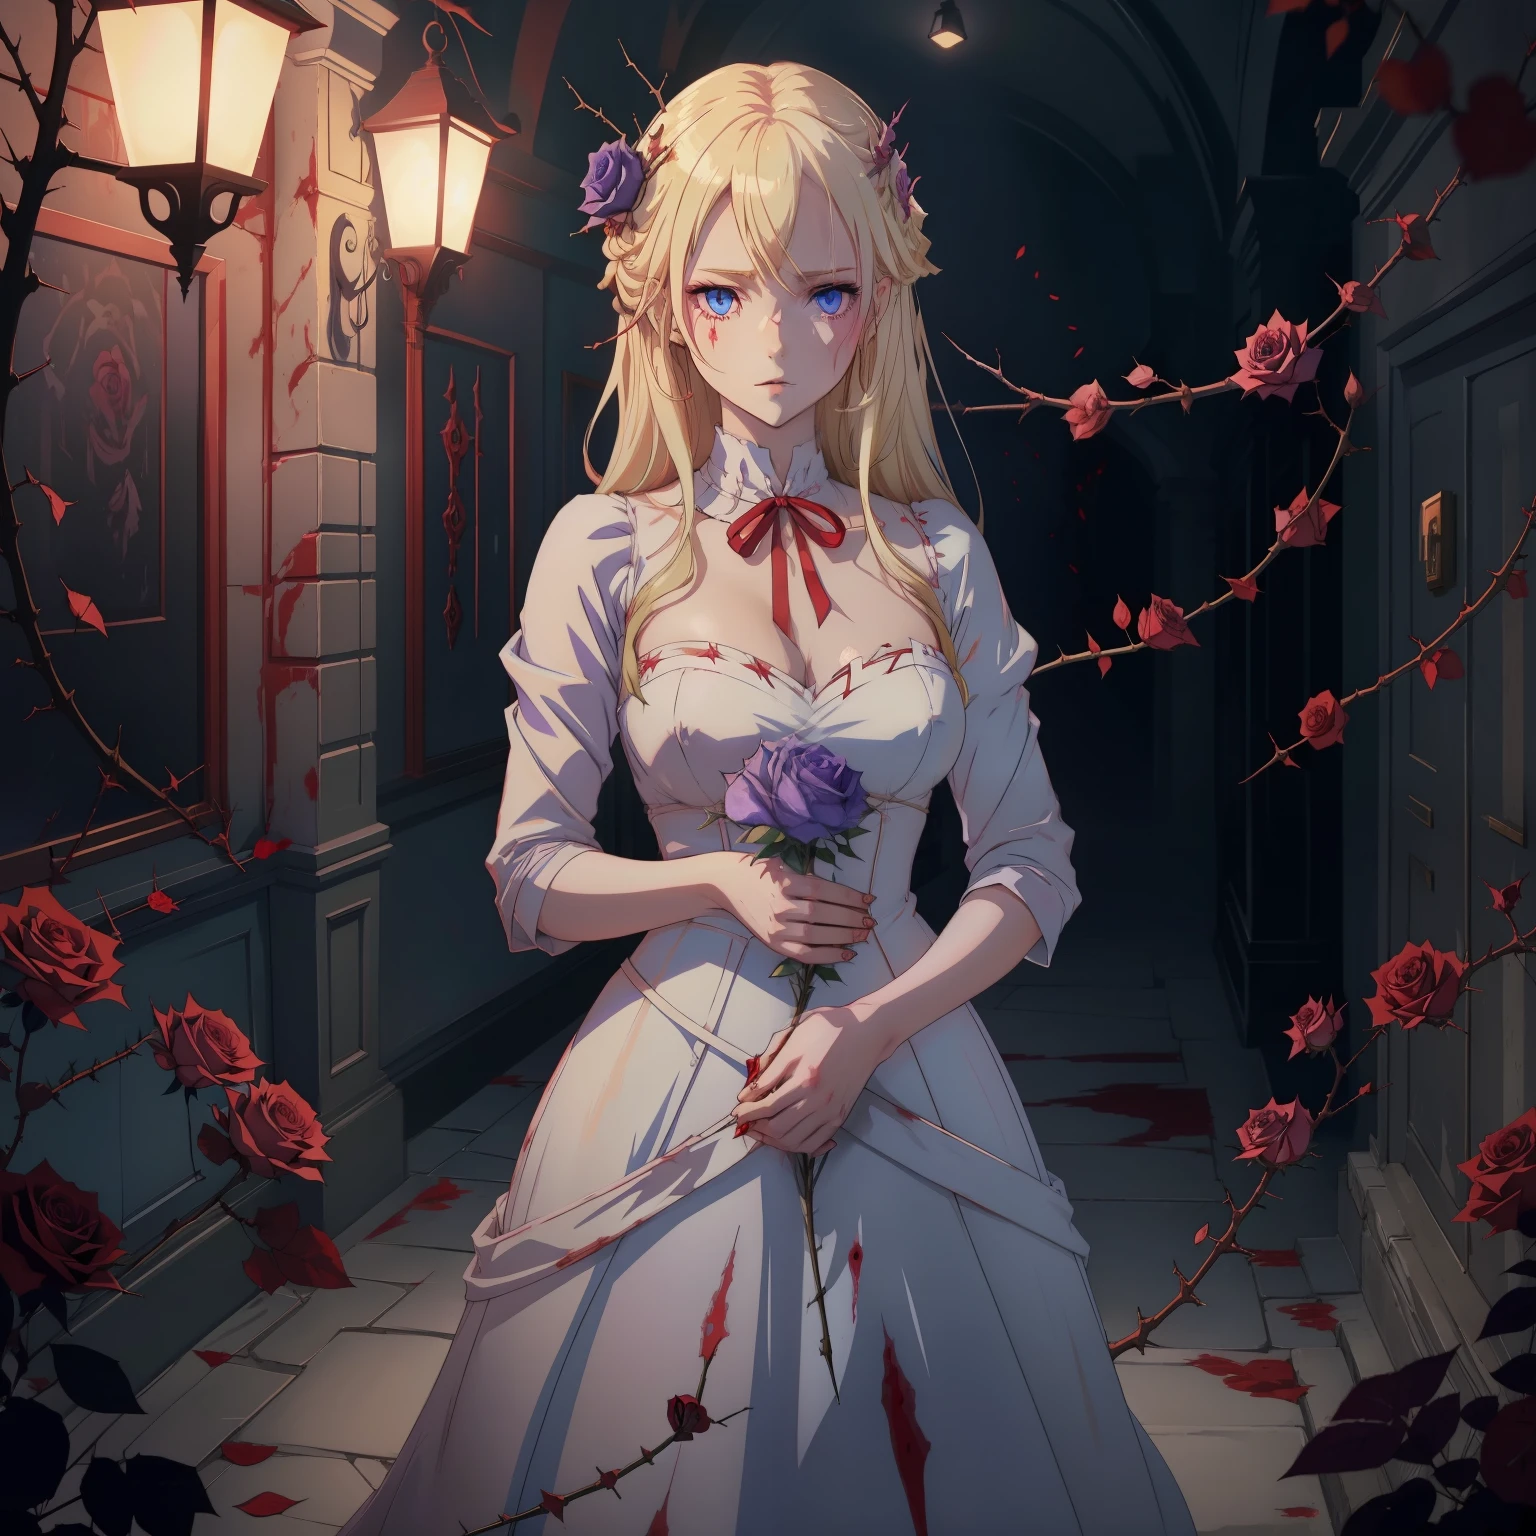 Light blonde haired anime girl with pale bluish violet colored eyes holding a thorny rose, thorns piercing the skin on her hand, bloody hands, blood trickling down her hand as she stands in a dark room with red ribbons alone